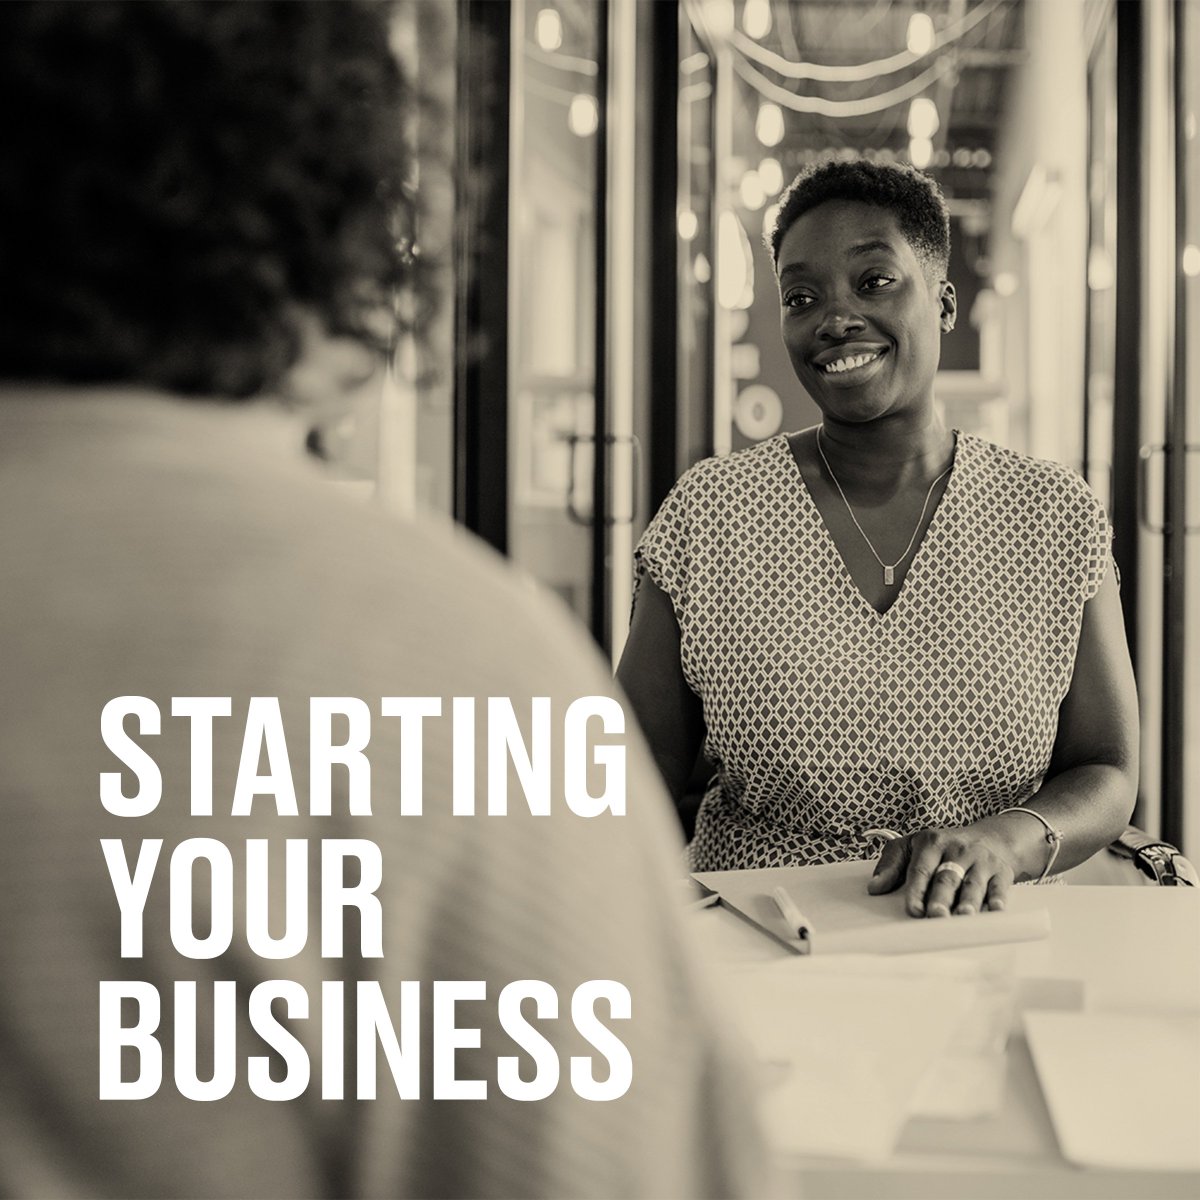 We break down three of the most important steps for new small business owners to take when getting started. Learn more in our blog post: bit.ly/3UkSOky Member FDIC.